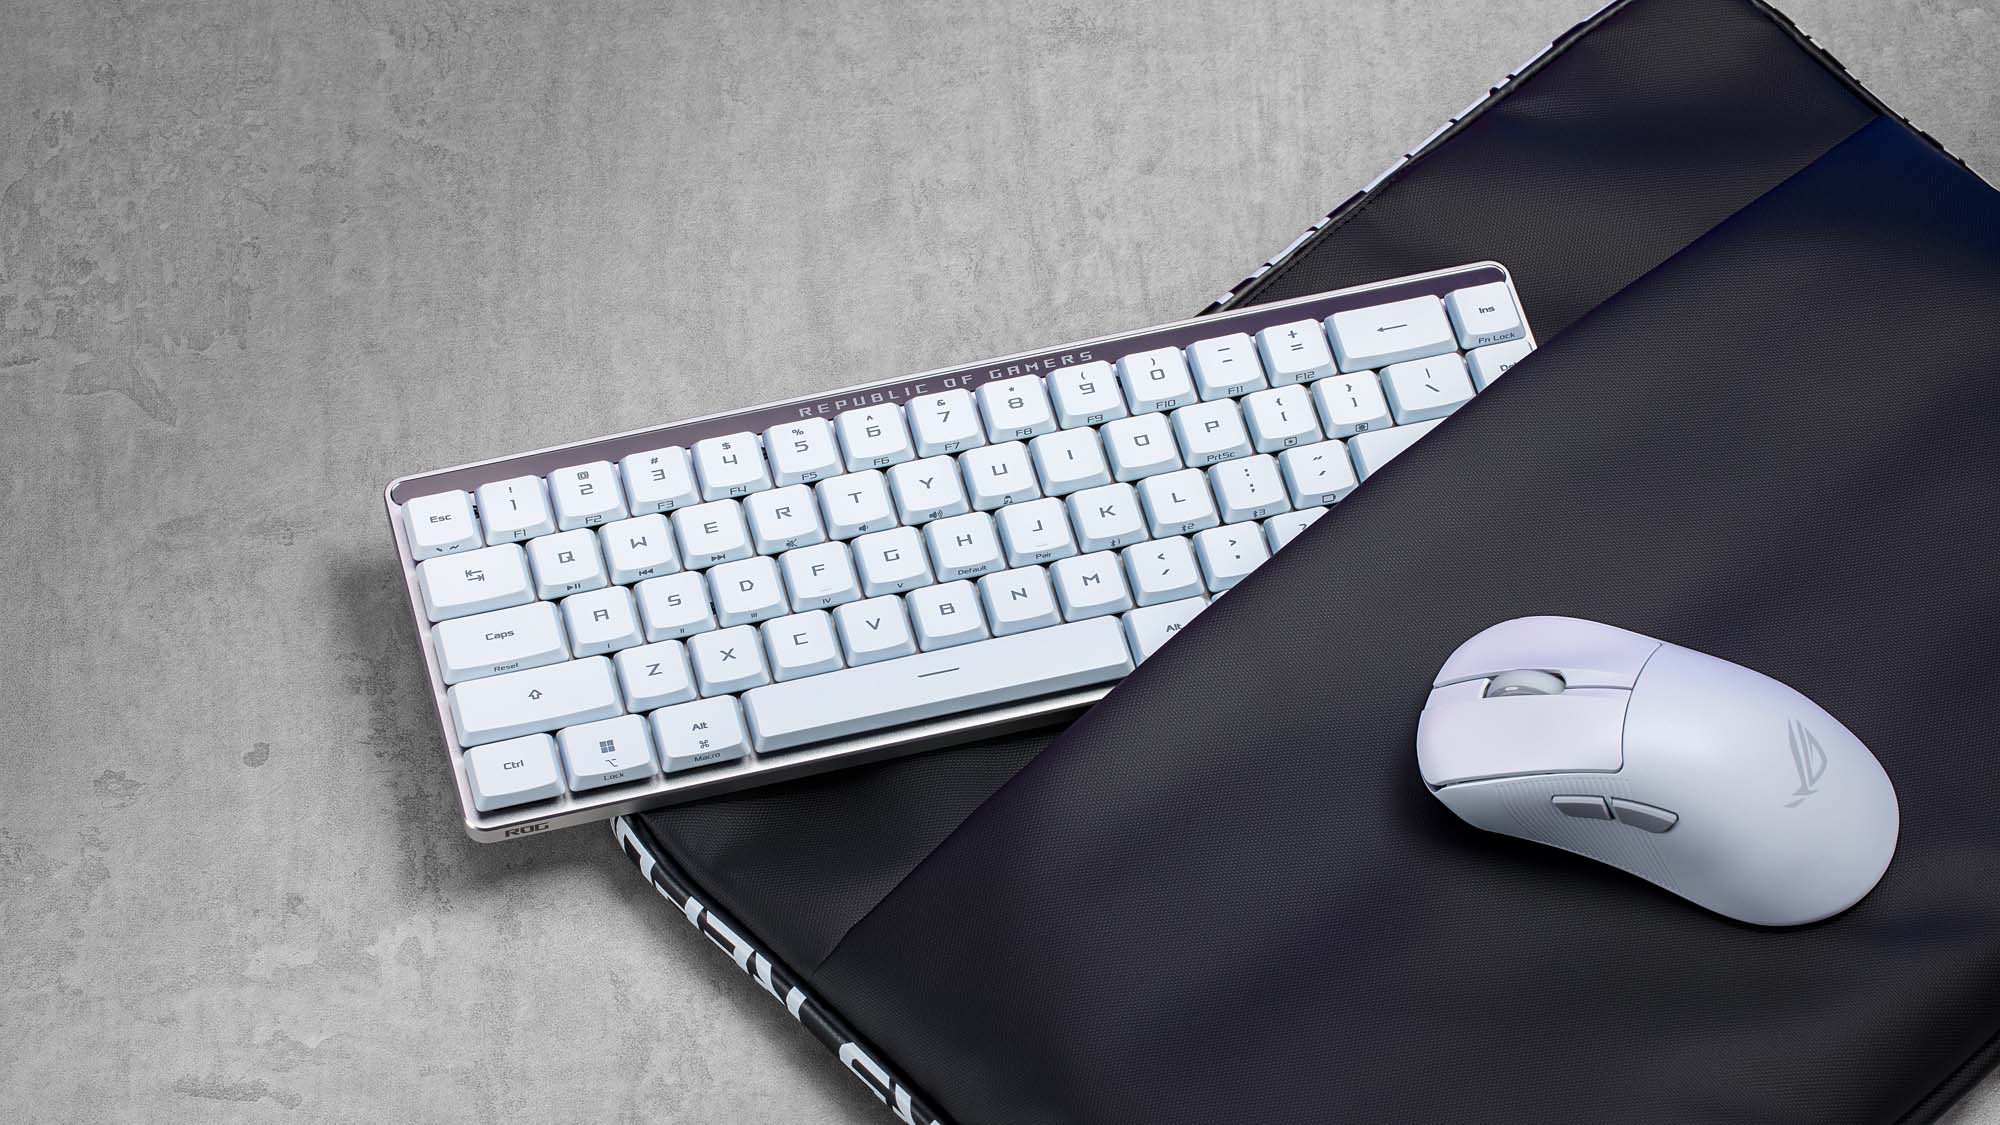 The ROG Falchion RX Low Profile keyboard and ROG Keris II Ace mouse half inserted into a carrying case.